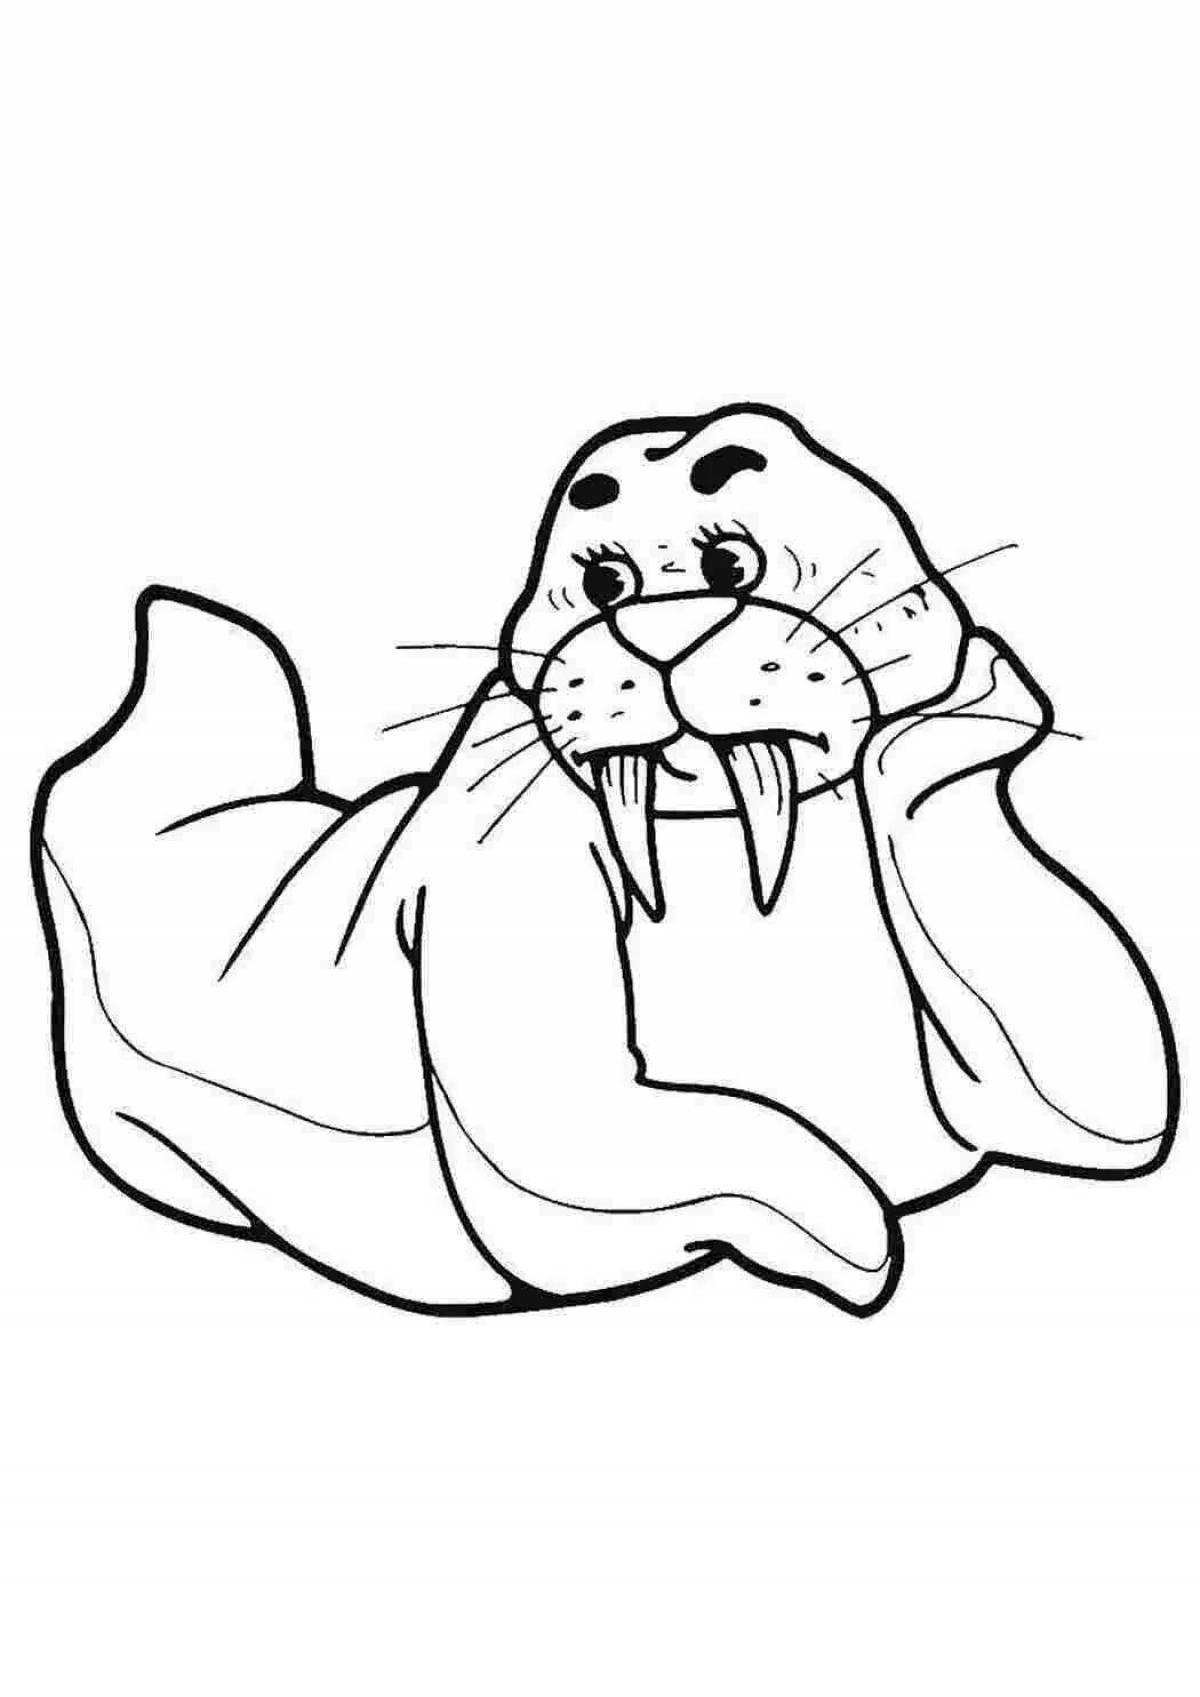 Creative sea lion coloring book for kids